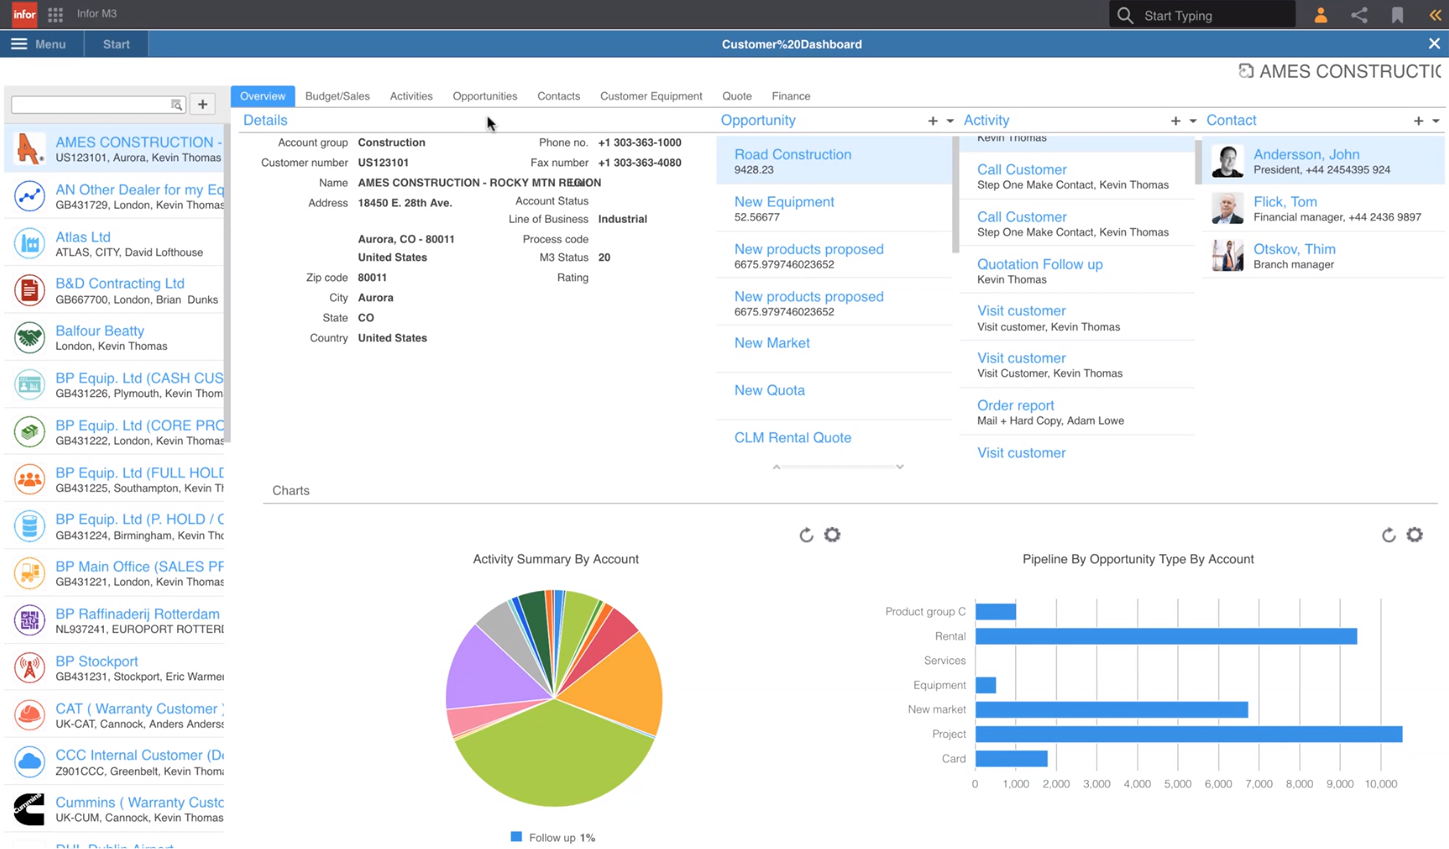 Infor M3 CRM dashboard